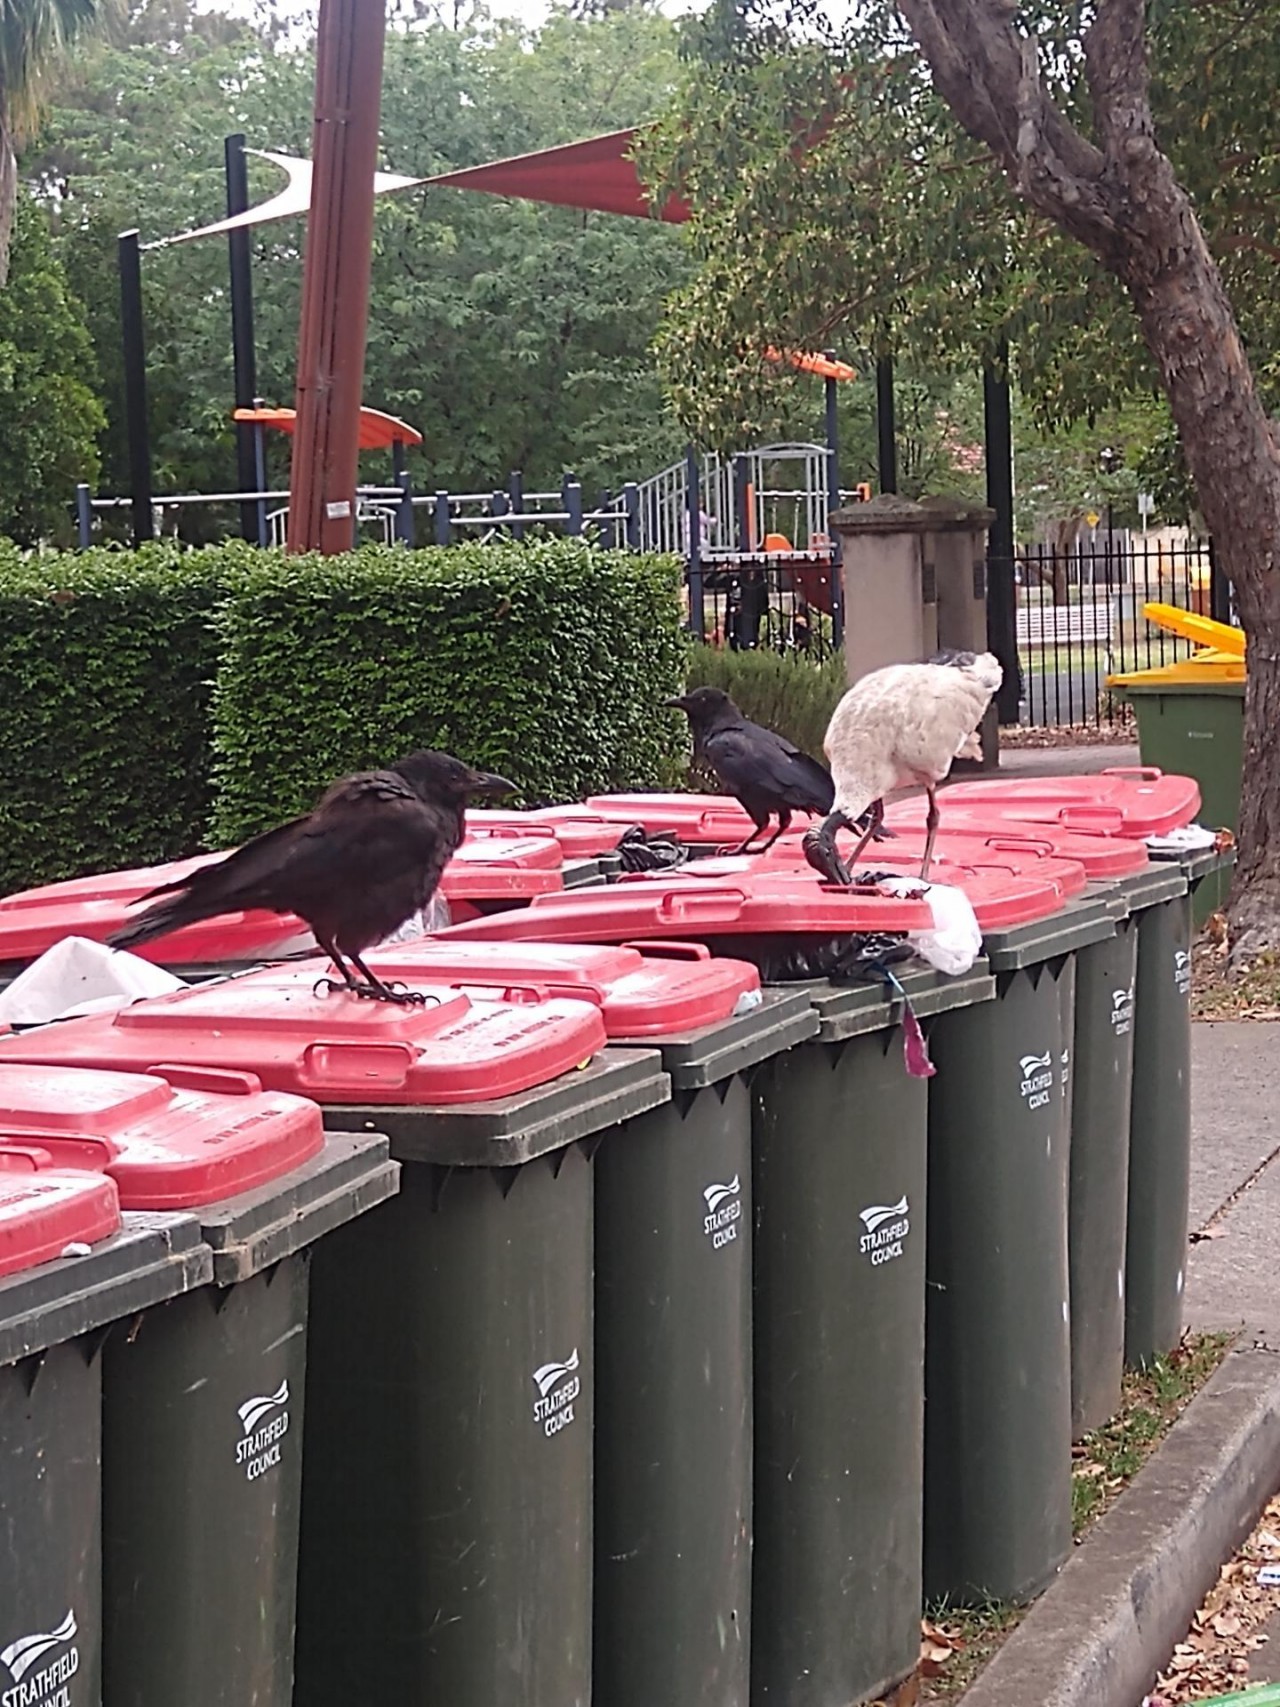 Digging in the bin &amp;amp; eating, accompanied by 2 Ravens. Couldn&#039;t get 